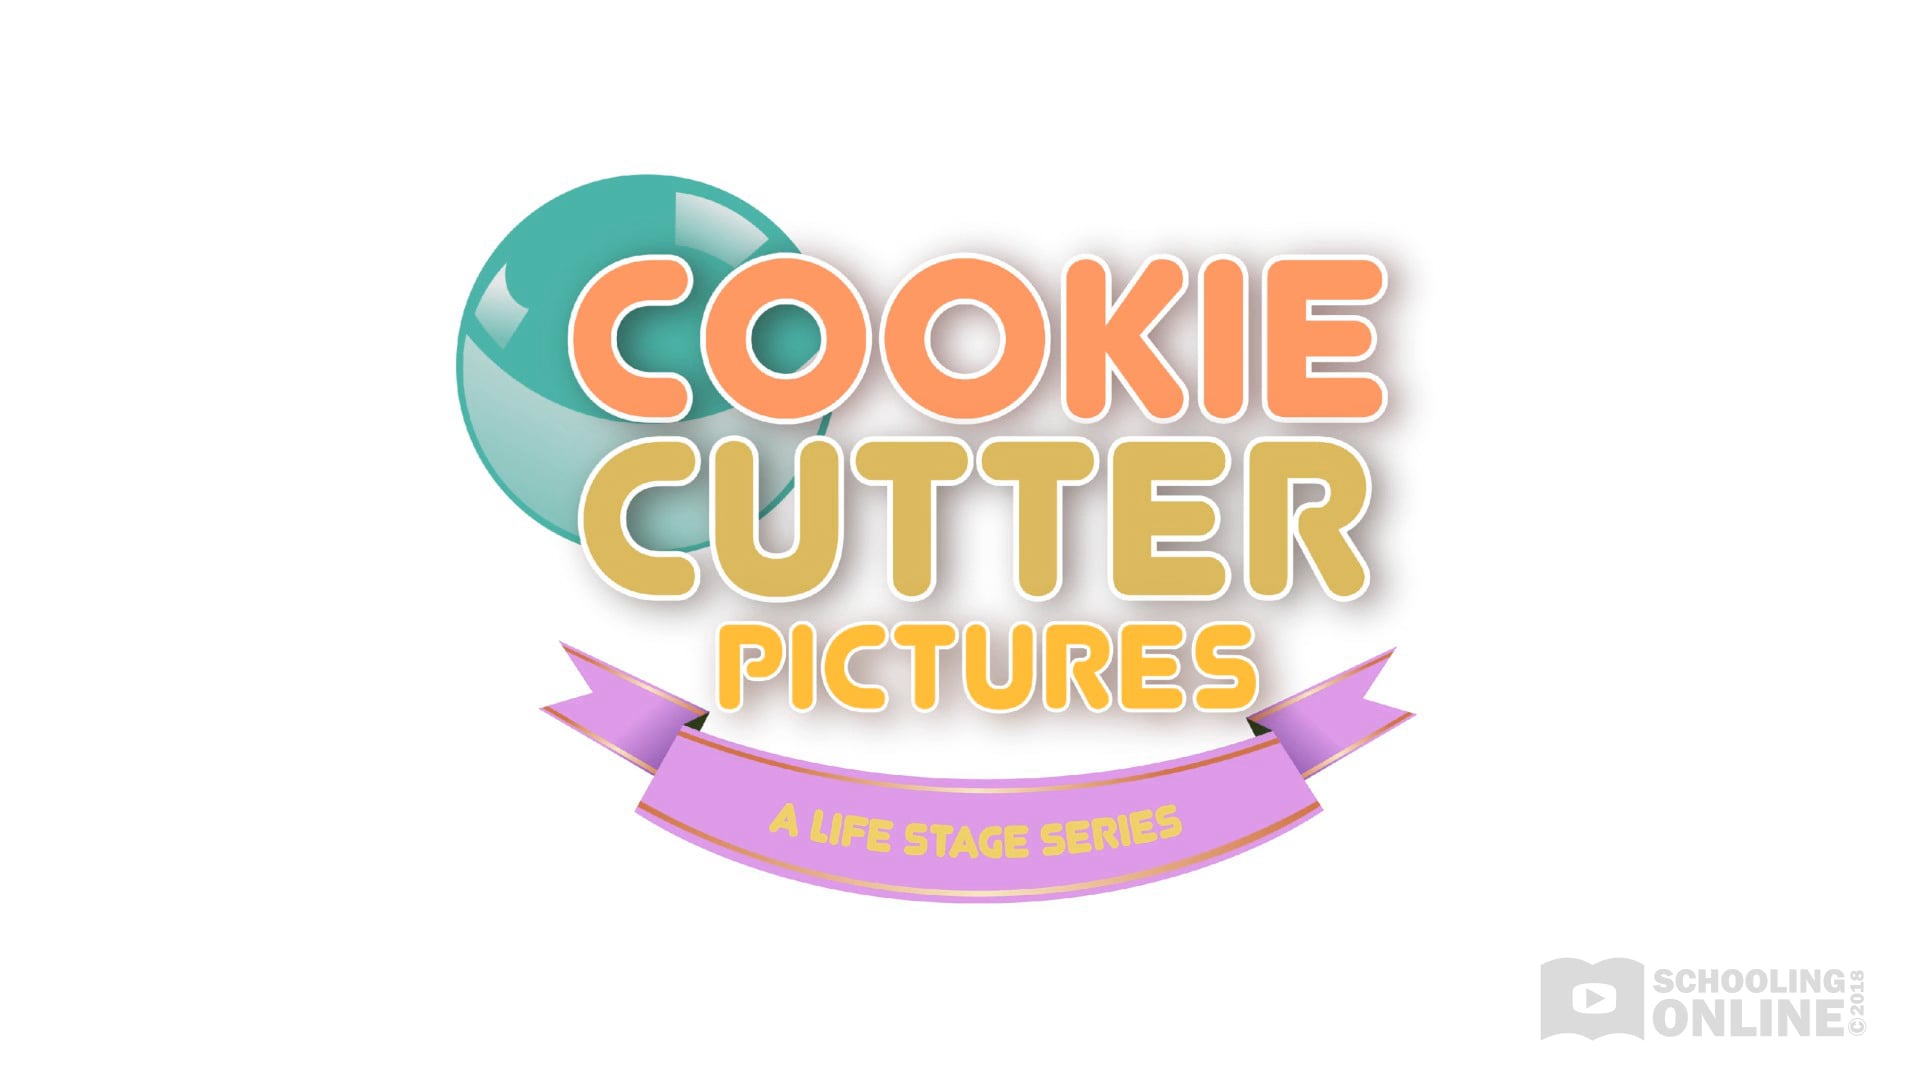 Cookie Cutter Pictures - The Life Stage Series